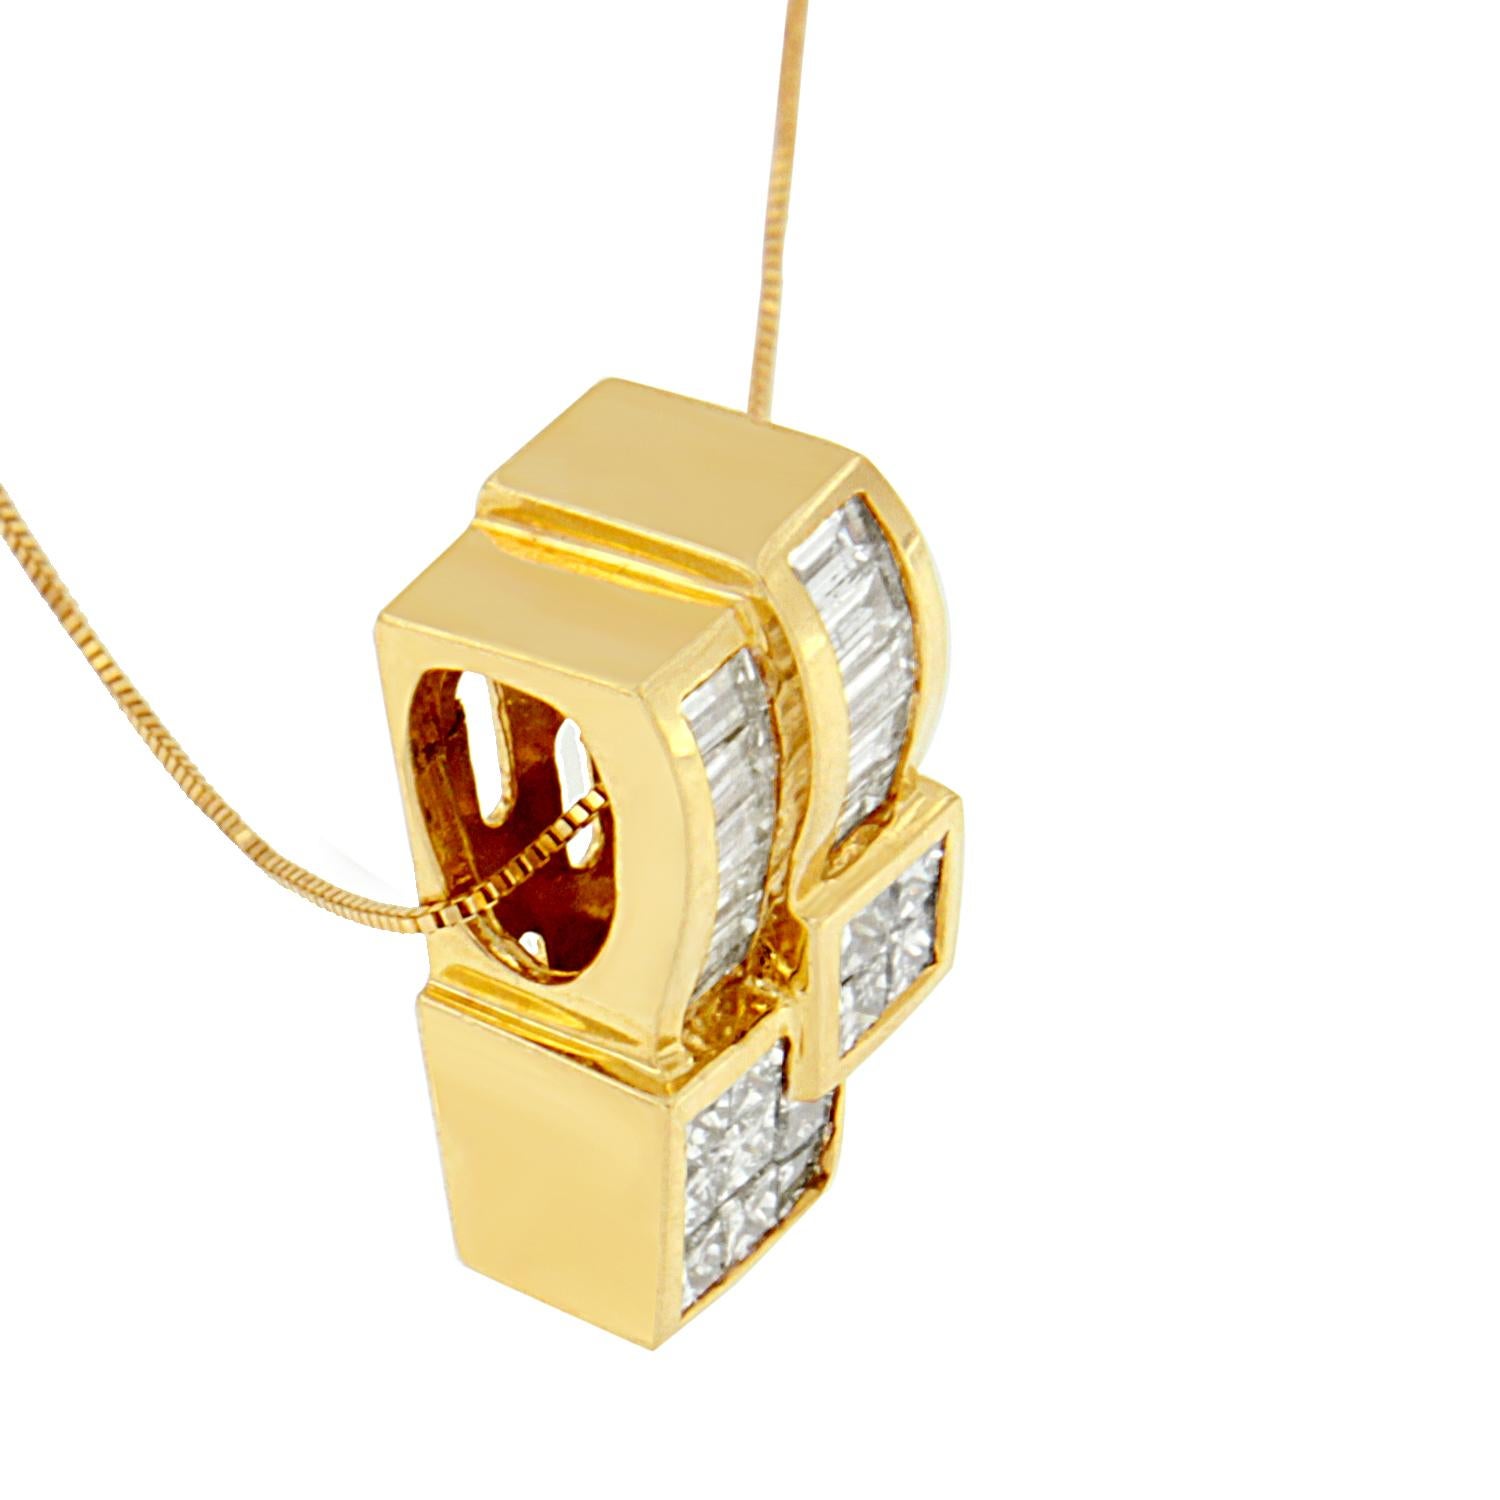 This whimsical 14k yellow gold pendant features dovetailed squares set with sparkling princess-cut diamonds capped with side-by-side ribbons channel set with baguettes. It's sure to become a favorite for all those special moments. This beautiful